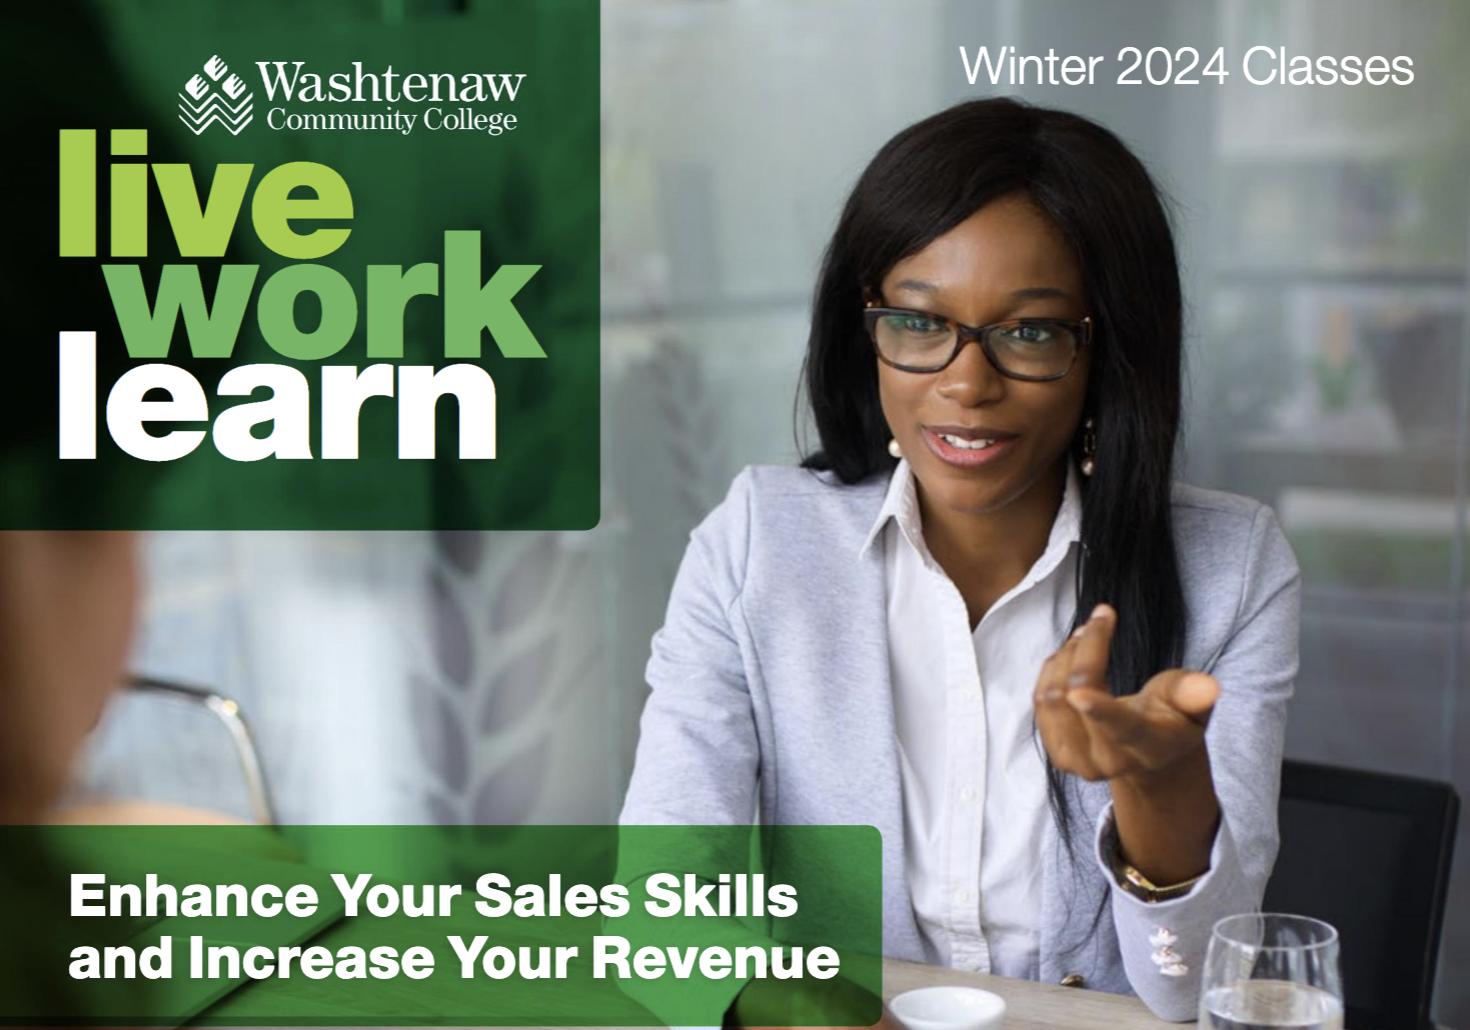 Winter 2024 edition of Live Work Learn magazine